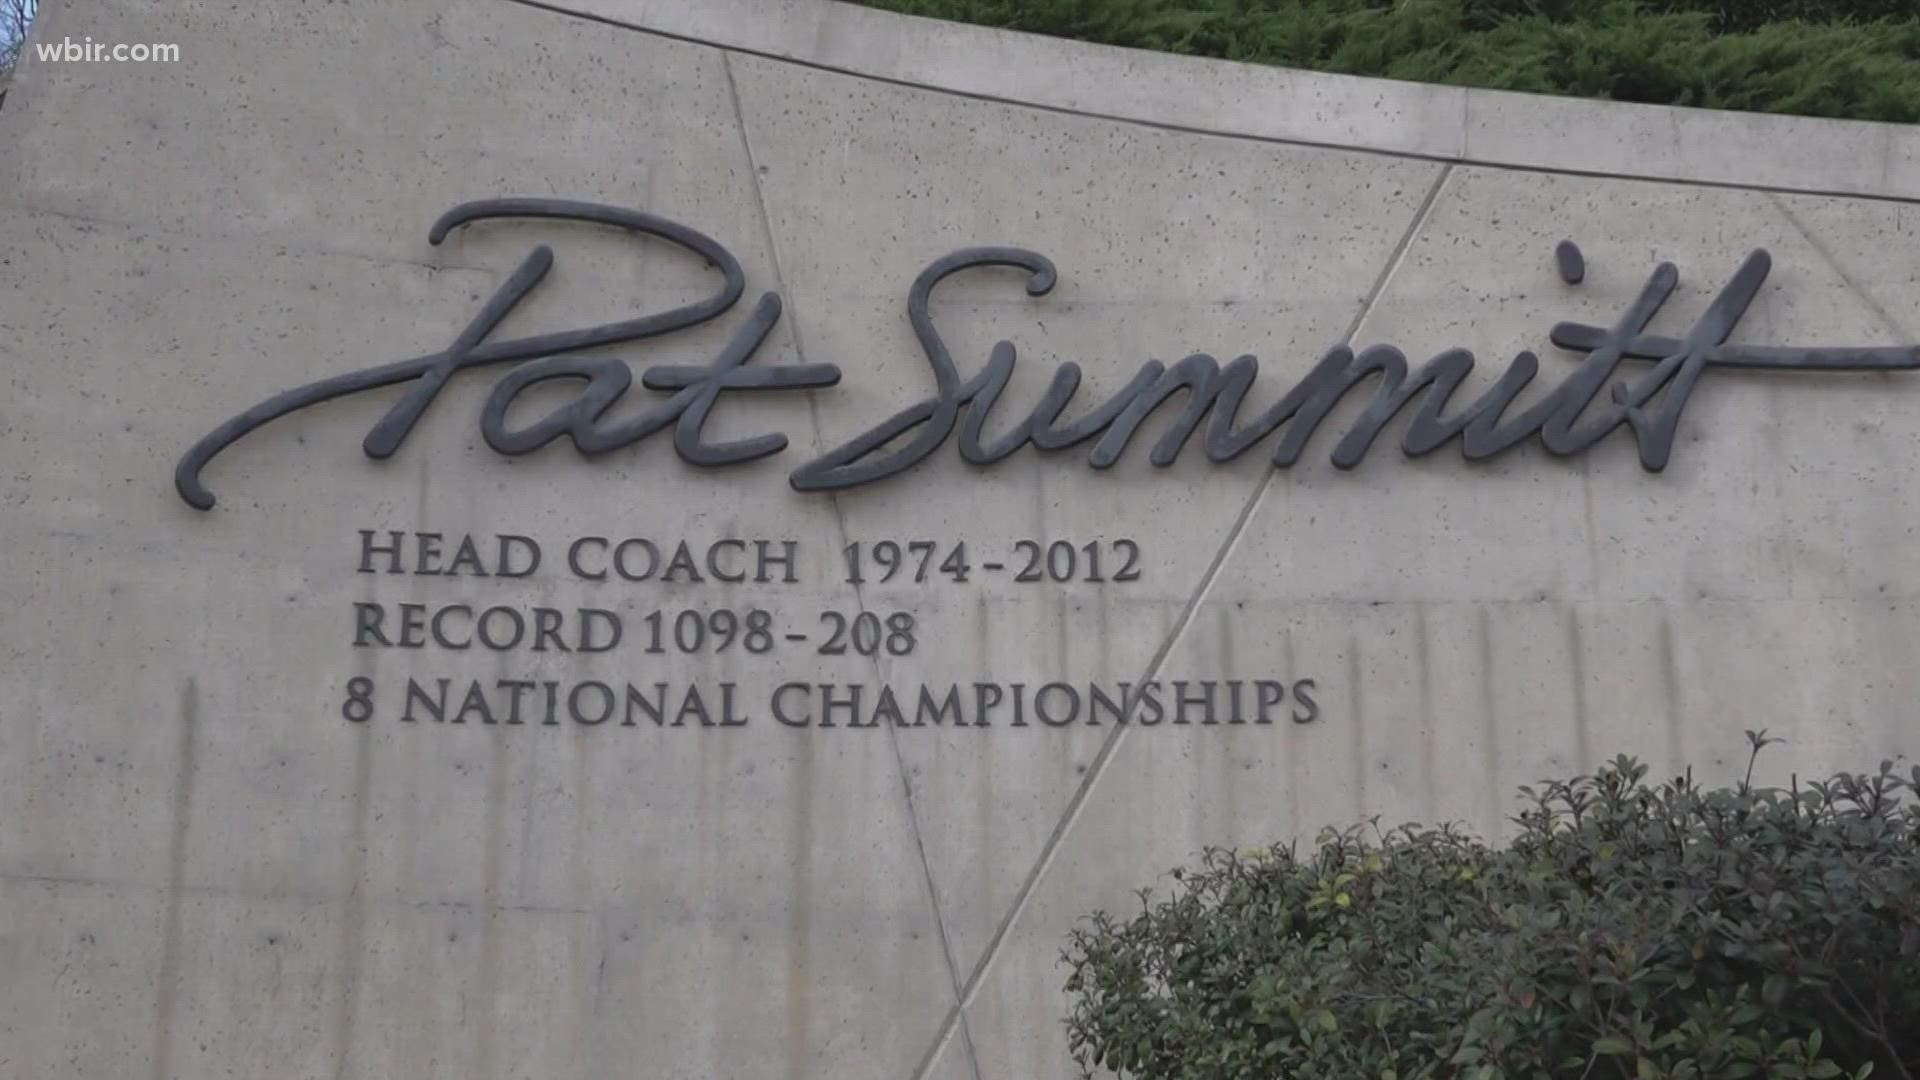 Diehard fans said the excitement and hype surrounding the Lady Vols feels similar to the Pat Summitt days of Rocky Top.